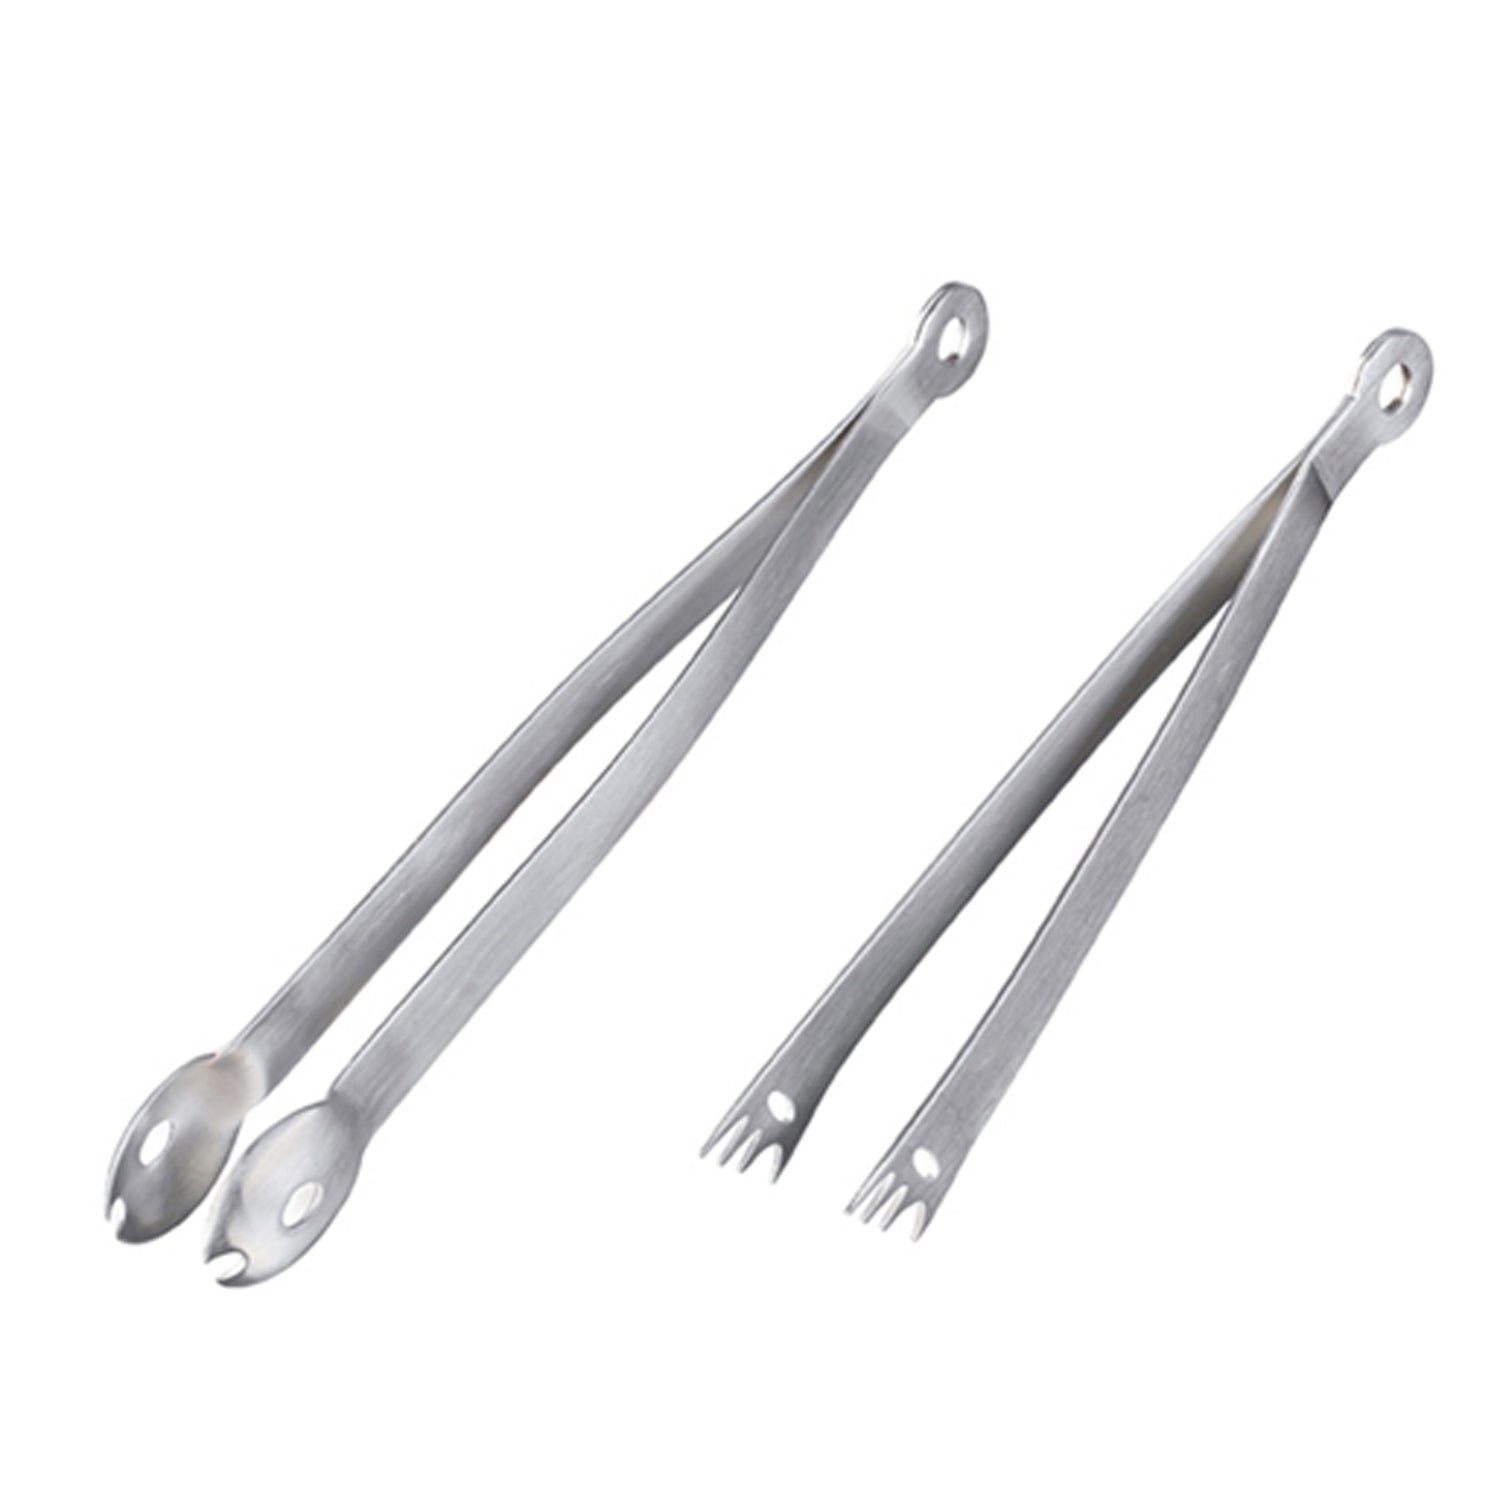 Nisbets Essentials Catering Tongs 245mm - DF668 - Buy Online at Nisbets